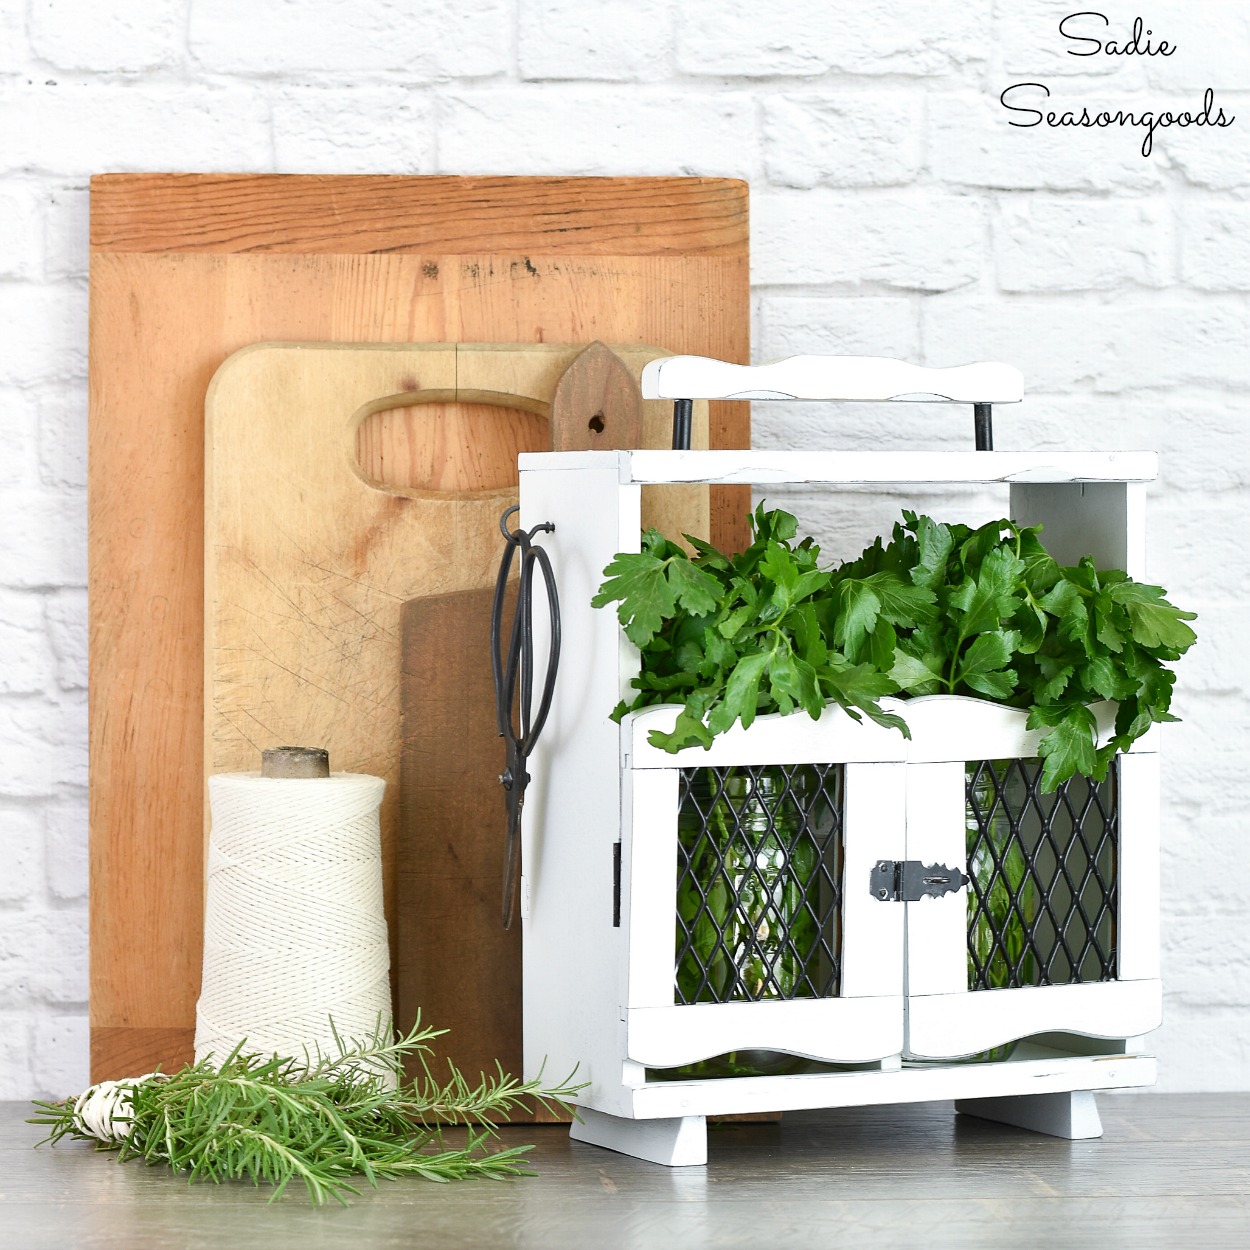 Upcycling a decanter tantalus as a wooden caddy for fresh herbs and herb saver